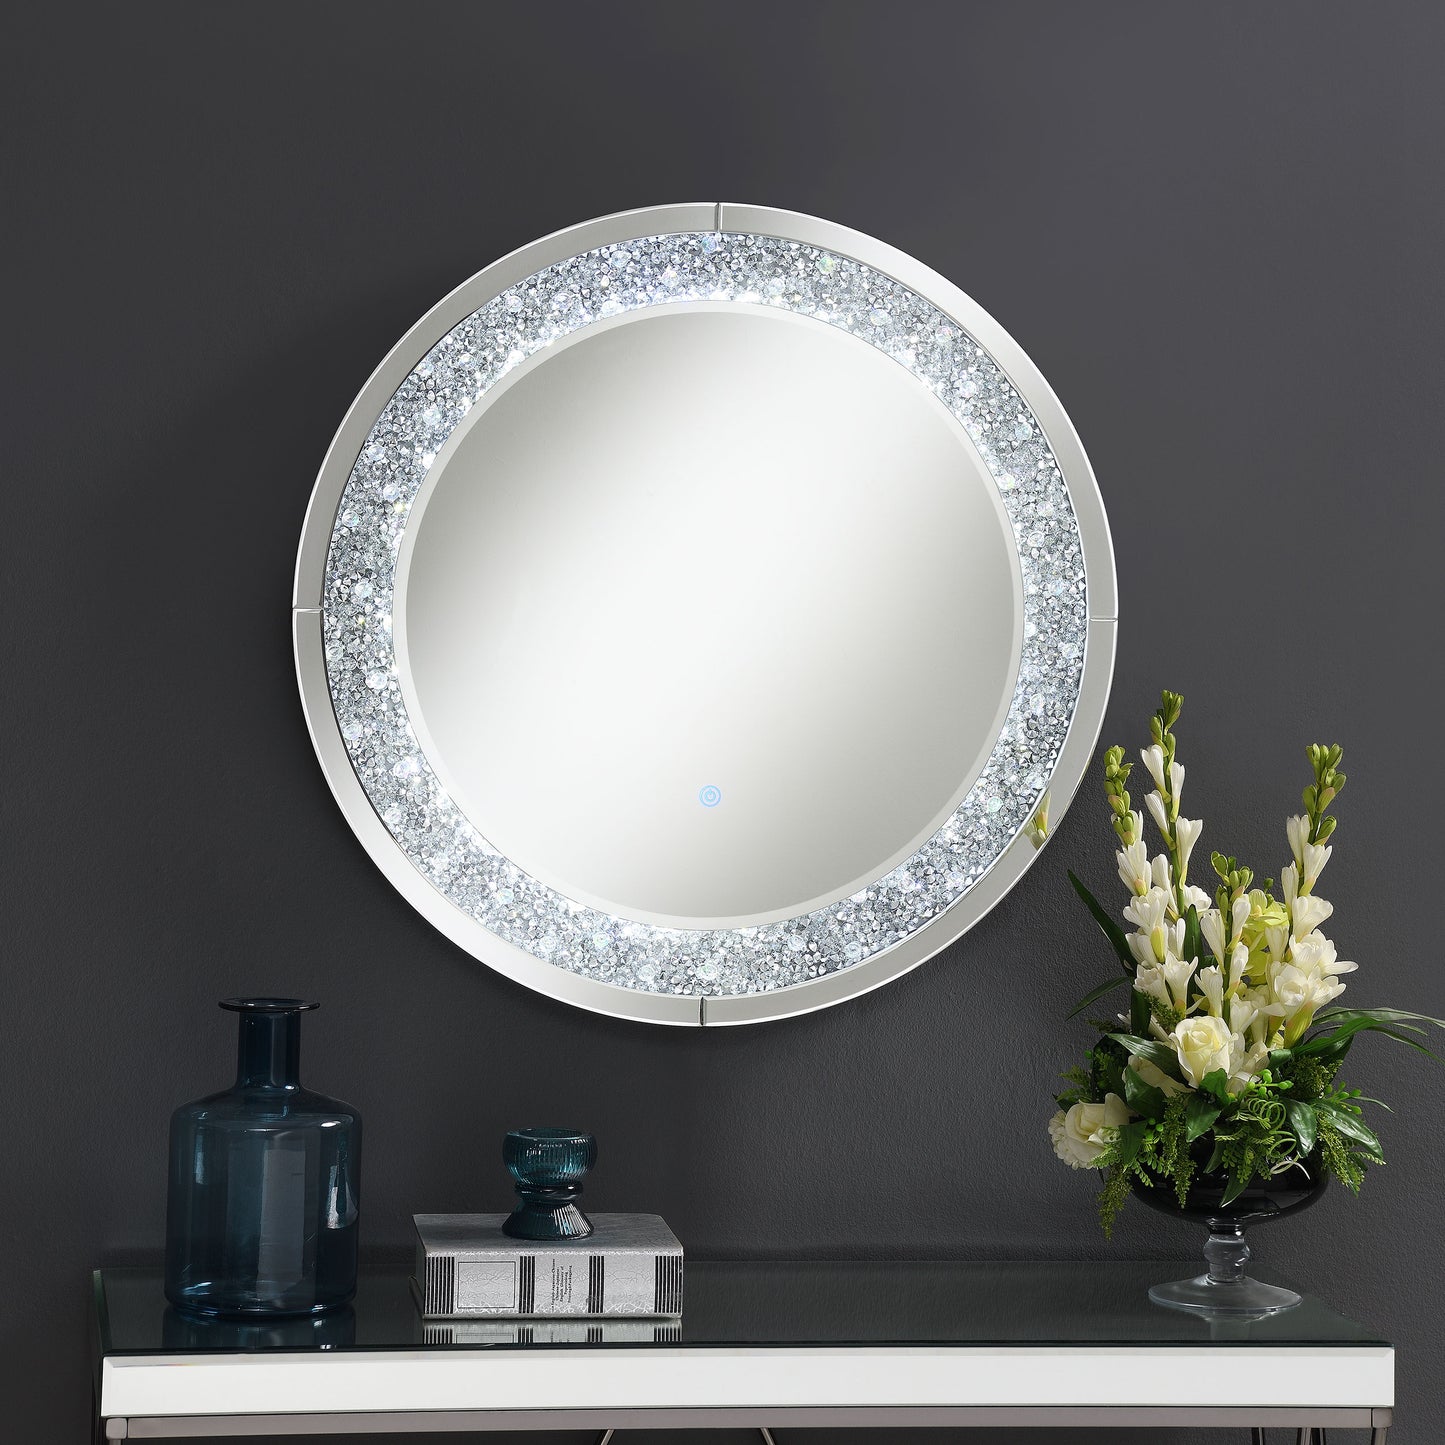 Lixue Round Wall Mirror with LED Lighting Silver